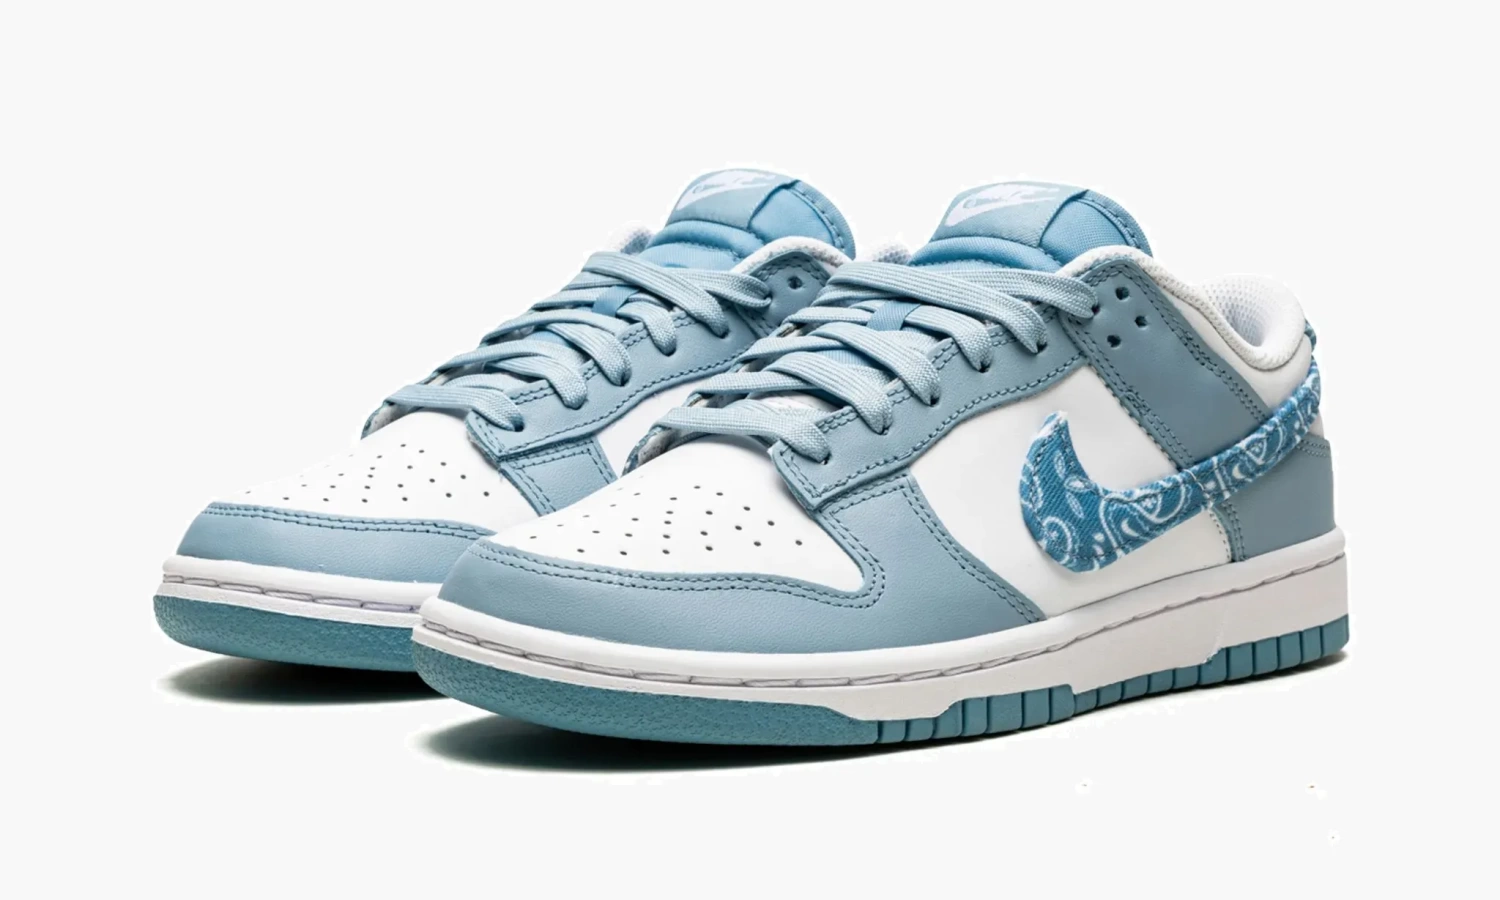 фото Dunk Low WMNS "Blue Paisley" (Nike Dunk)-DH4401 101